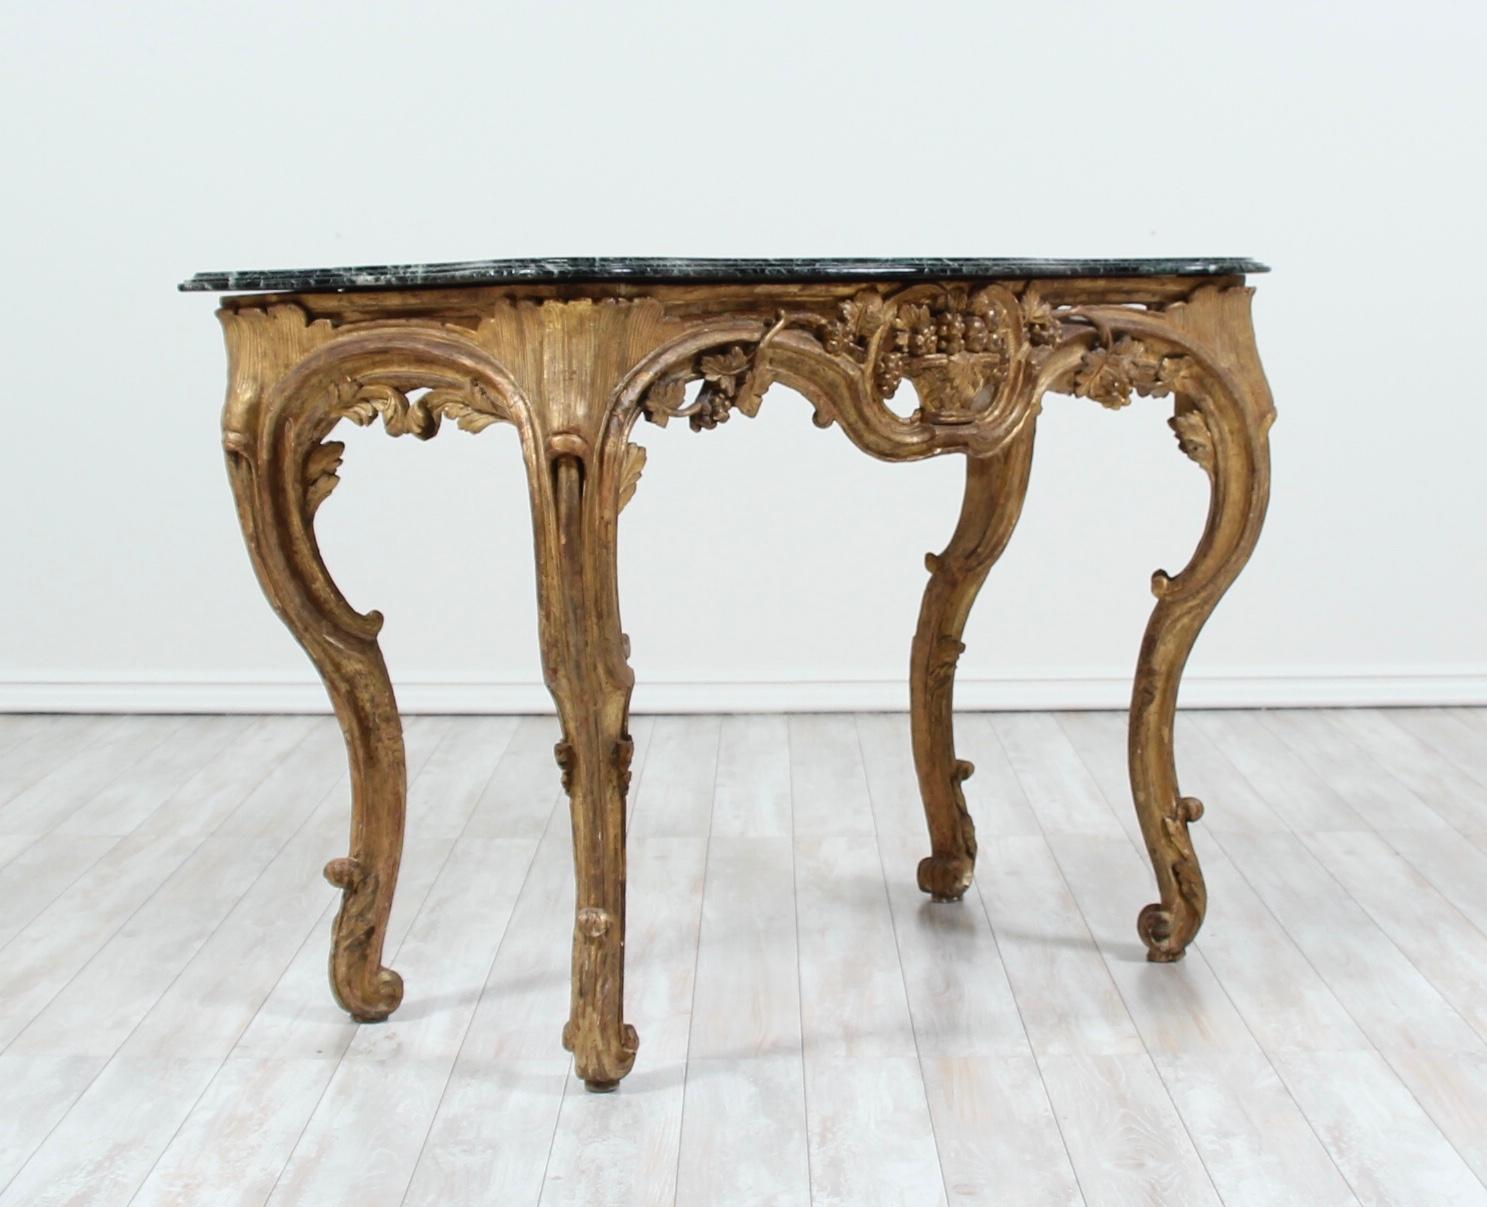 Beautiful, antique 19th century Italian giltwood console with a deep green marble top in the Baroque style. The console features a carved grapevine motif with a basket of fruit at the center of the frieze and cabriole legs. A wonderful addition to